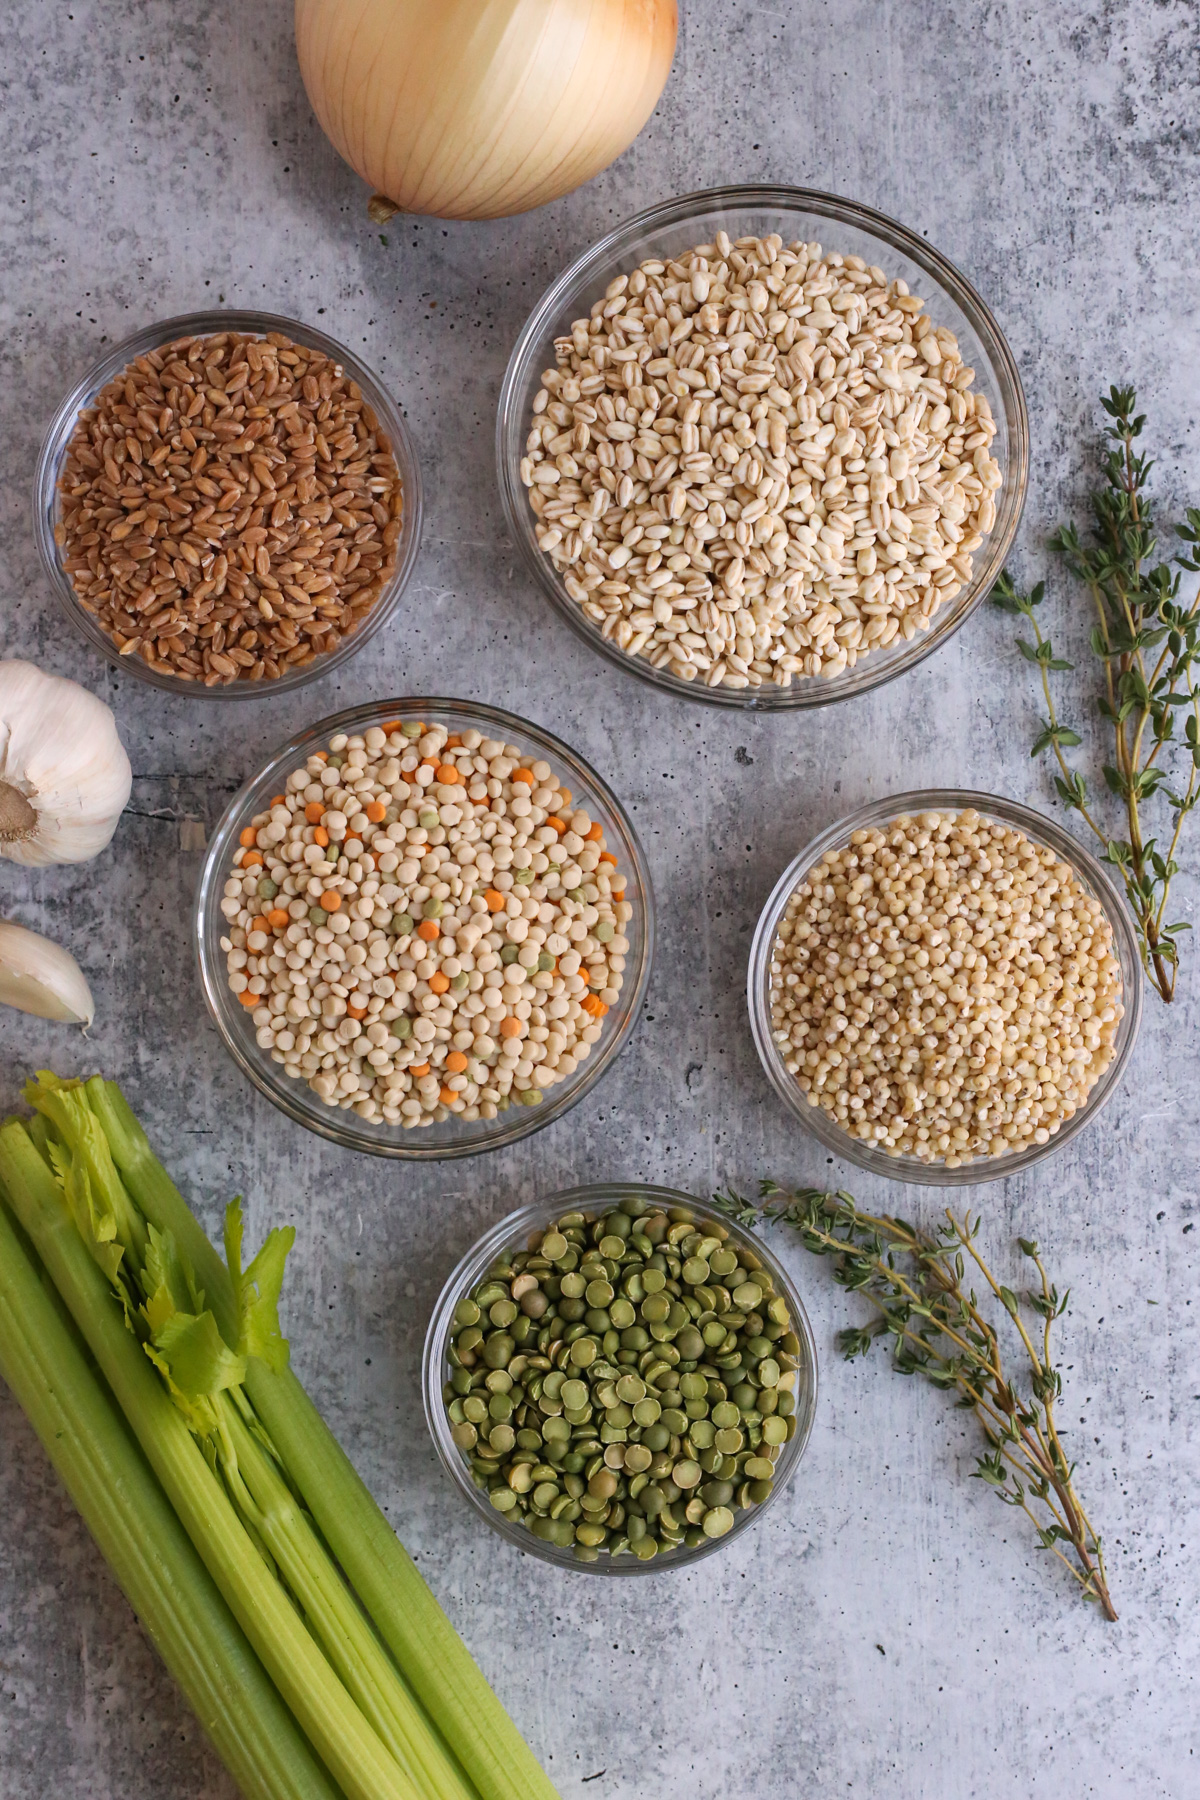 Comparison of various grains displayed in small ramekins, including pearled couscous, barley, farro, pearled sorghum, and green split peas